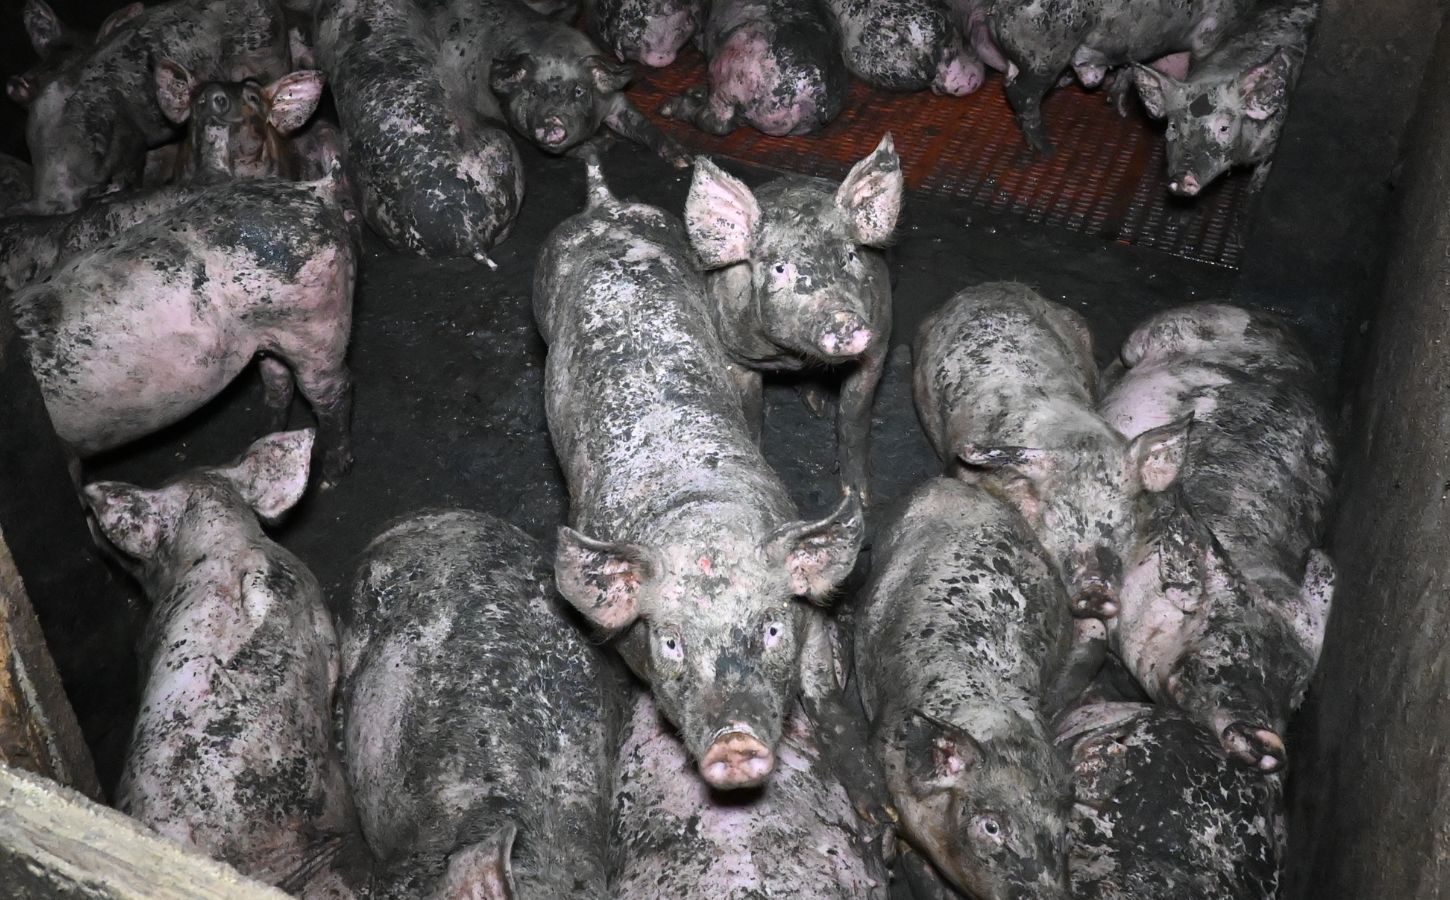 UK Urged To End Factory Farming After 'Shocking' (And Completely Legal)  Conditions Exposed